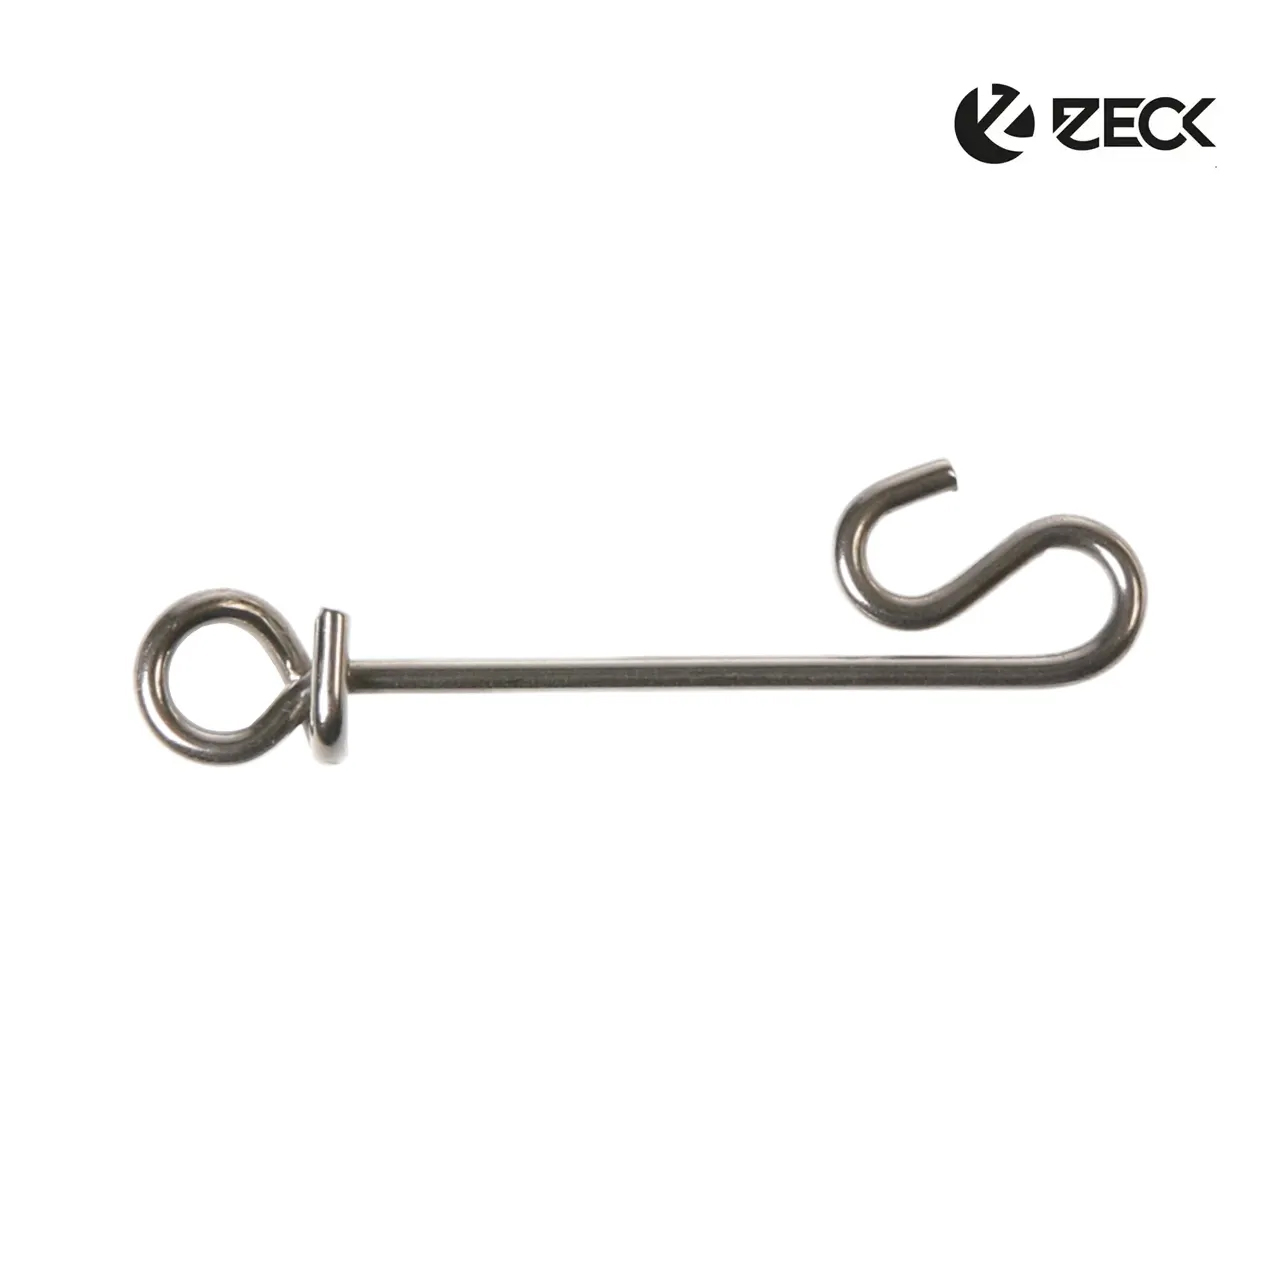 Zeck Fishing Knotless Connector X-Safe XXL